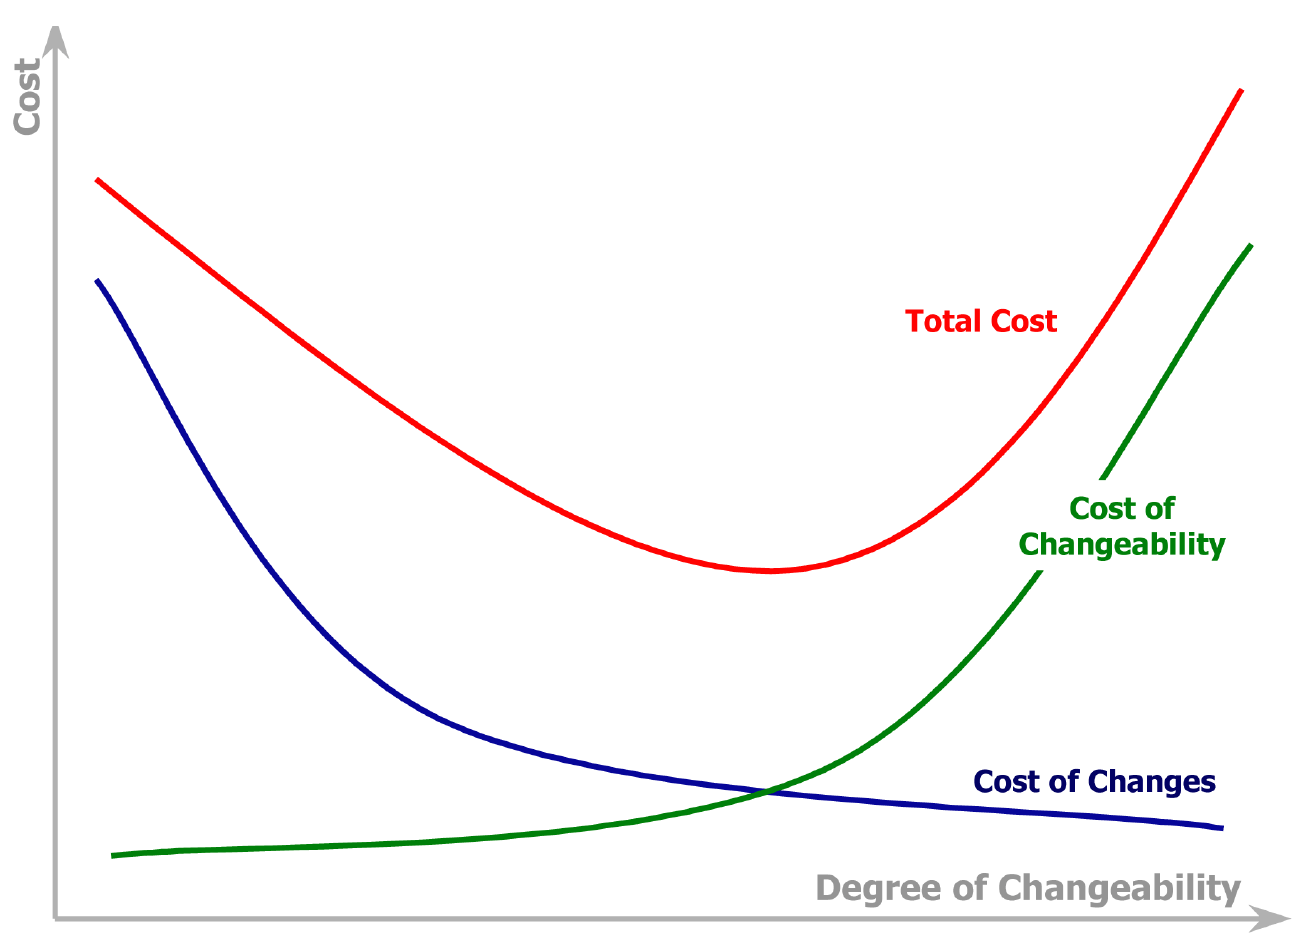 Total costs of changeability plotted over the degree of changeability